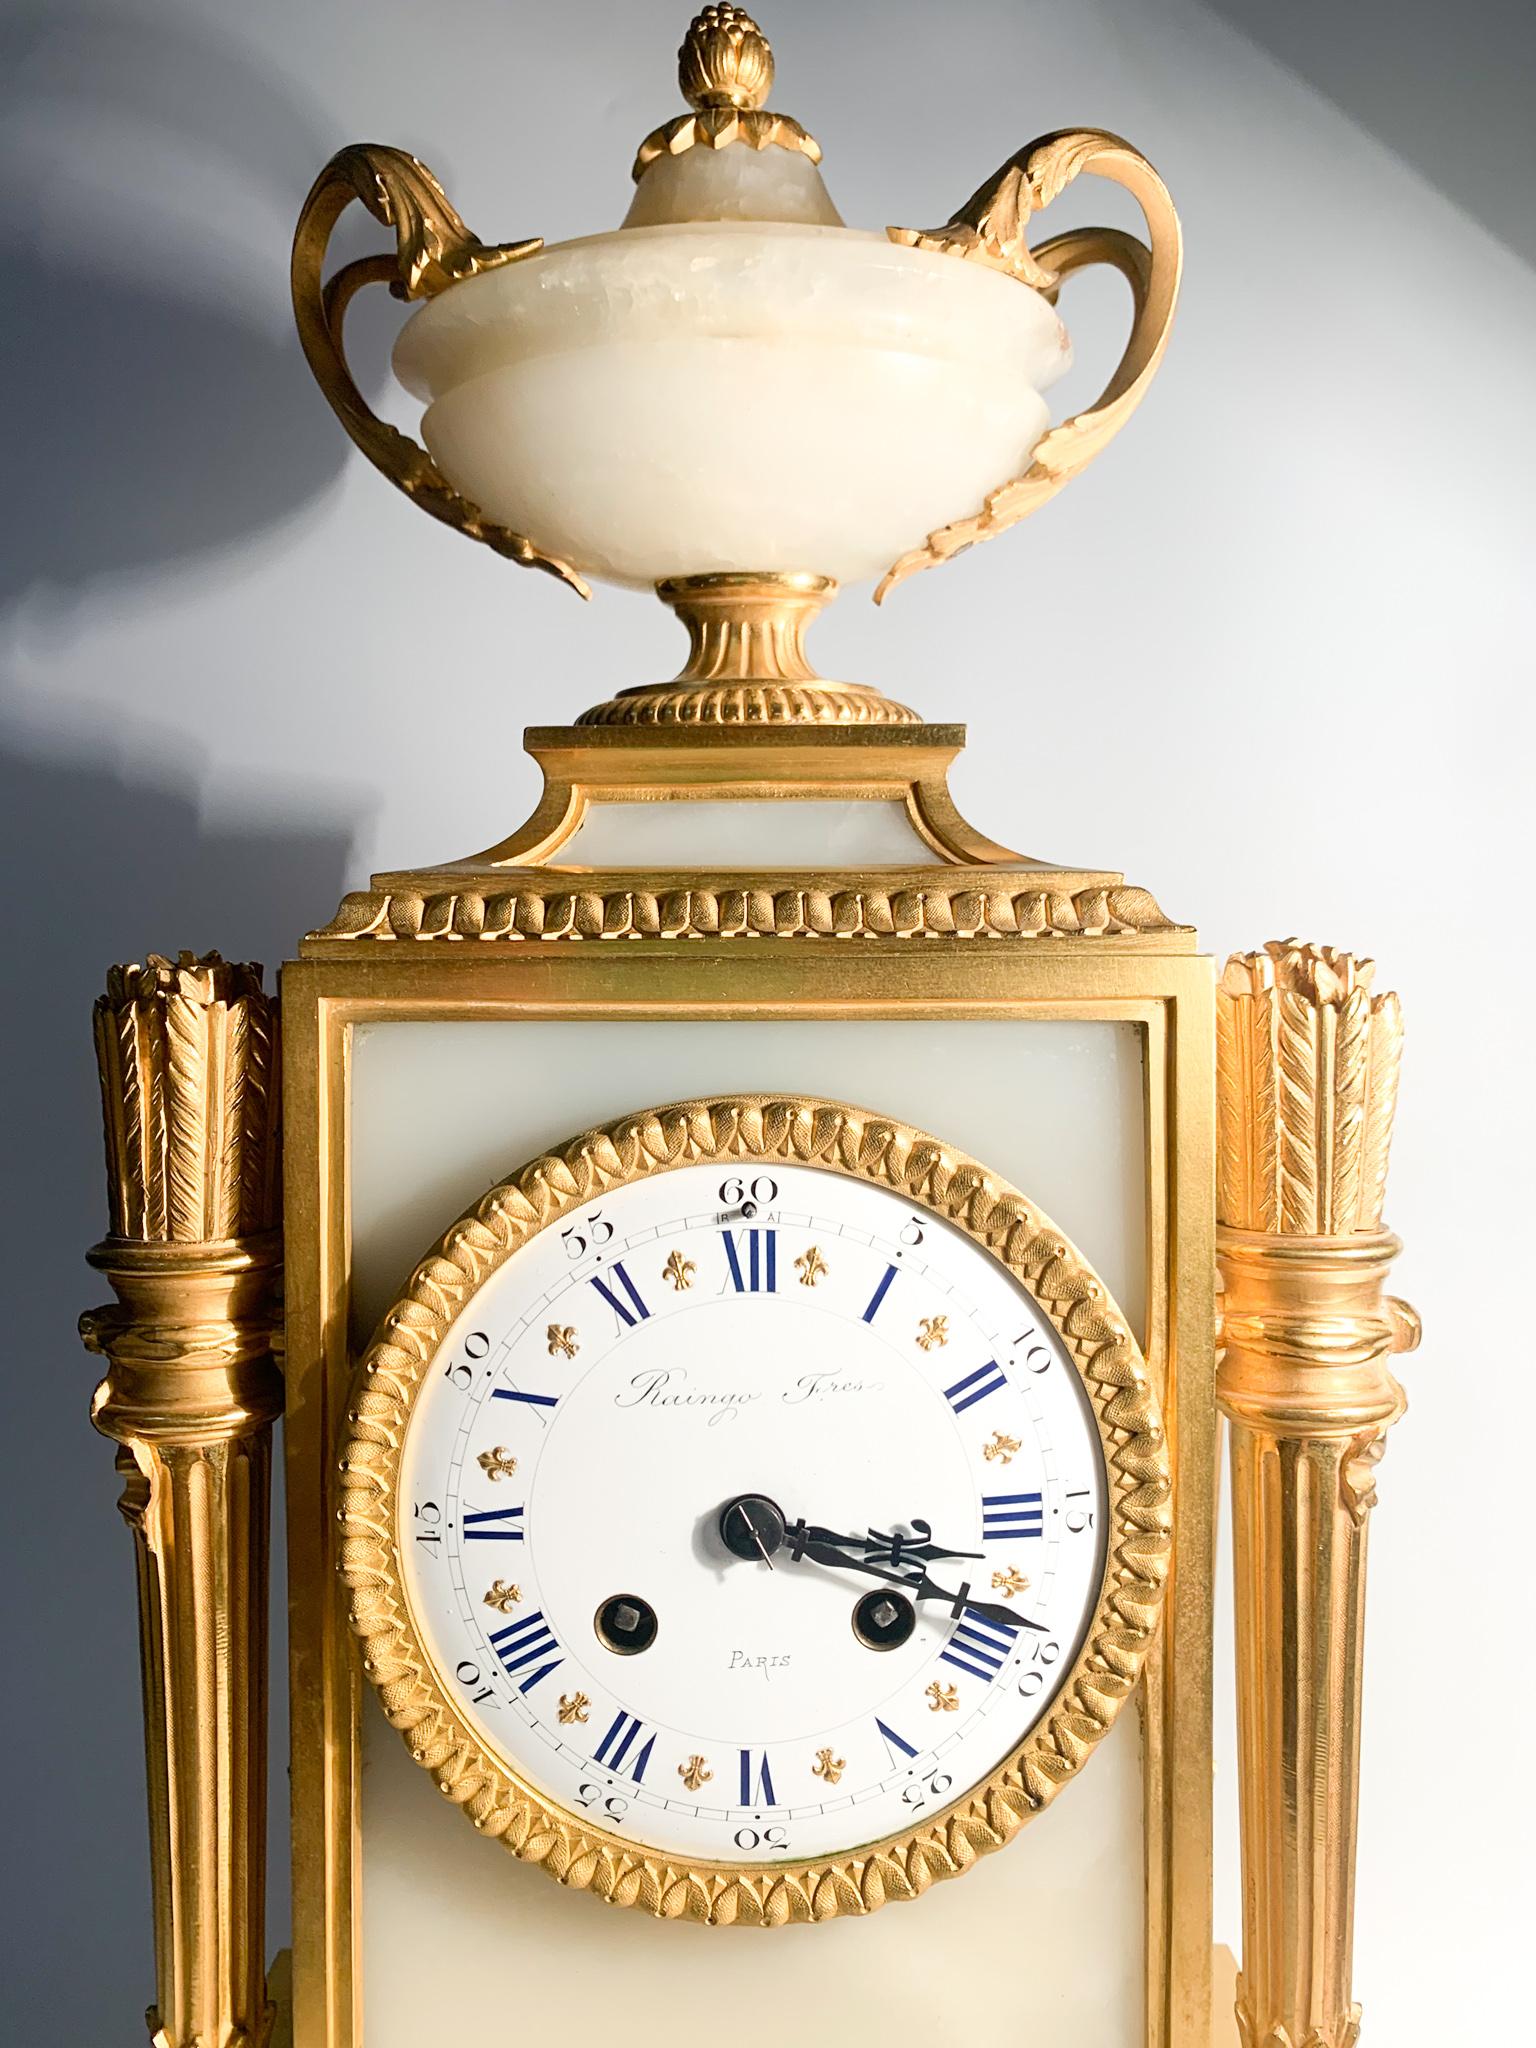 Raingo Frères Louis XVI Style Table Clock in Alabaster & Gilded Bronze, 1800 For Sale 3